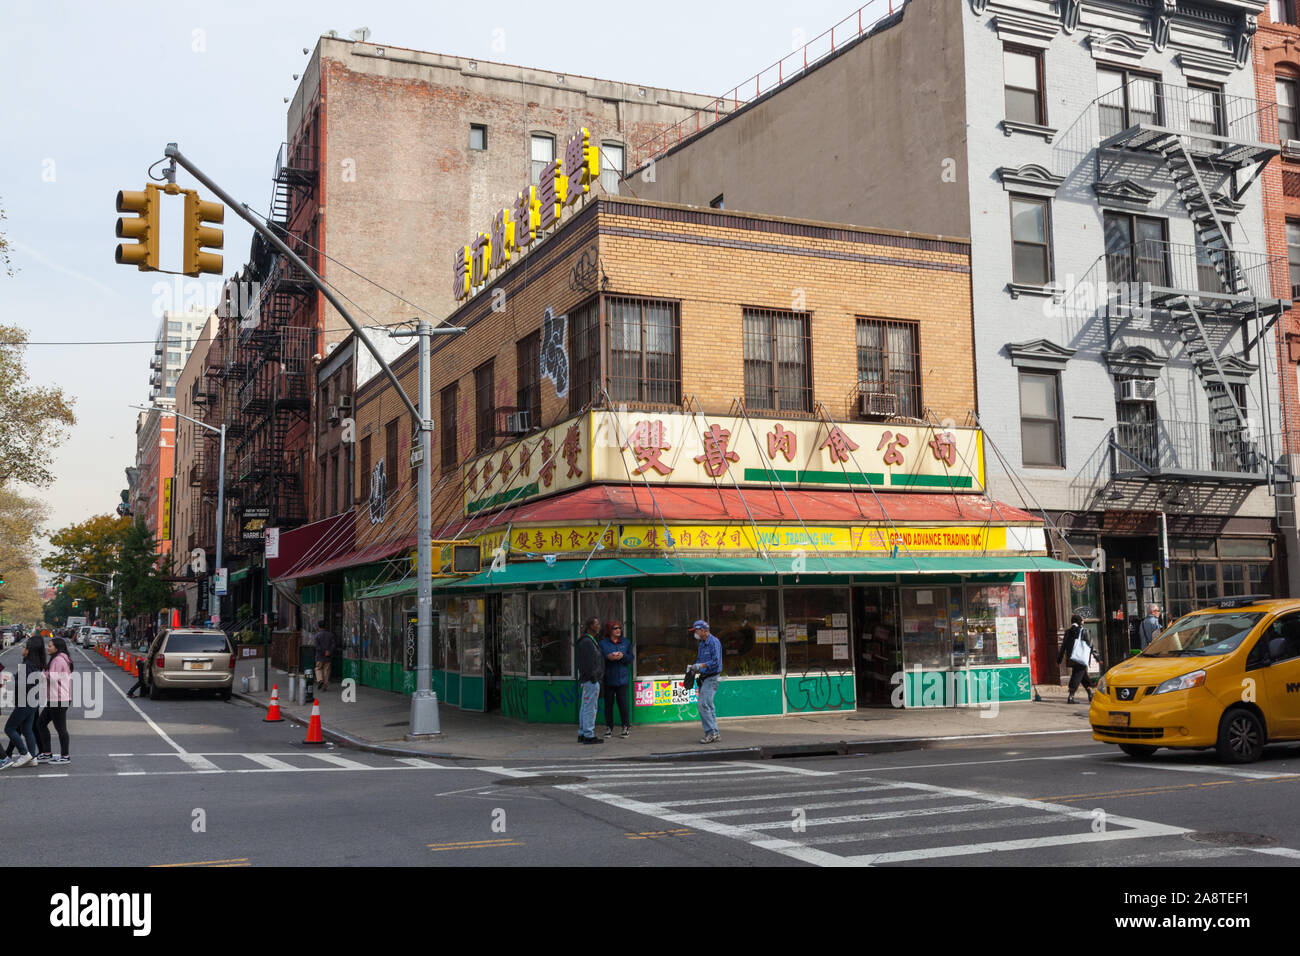 Fairtown trading Inc grocery store, Grand Street, Chinatown, New York City, United States of America. Stock Photo